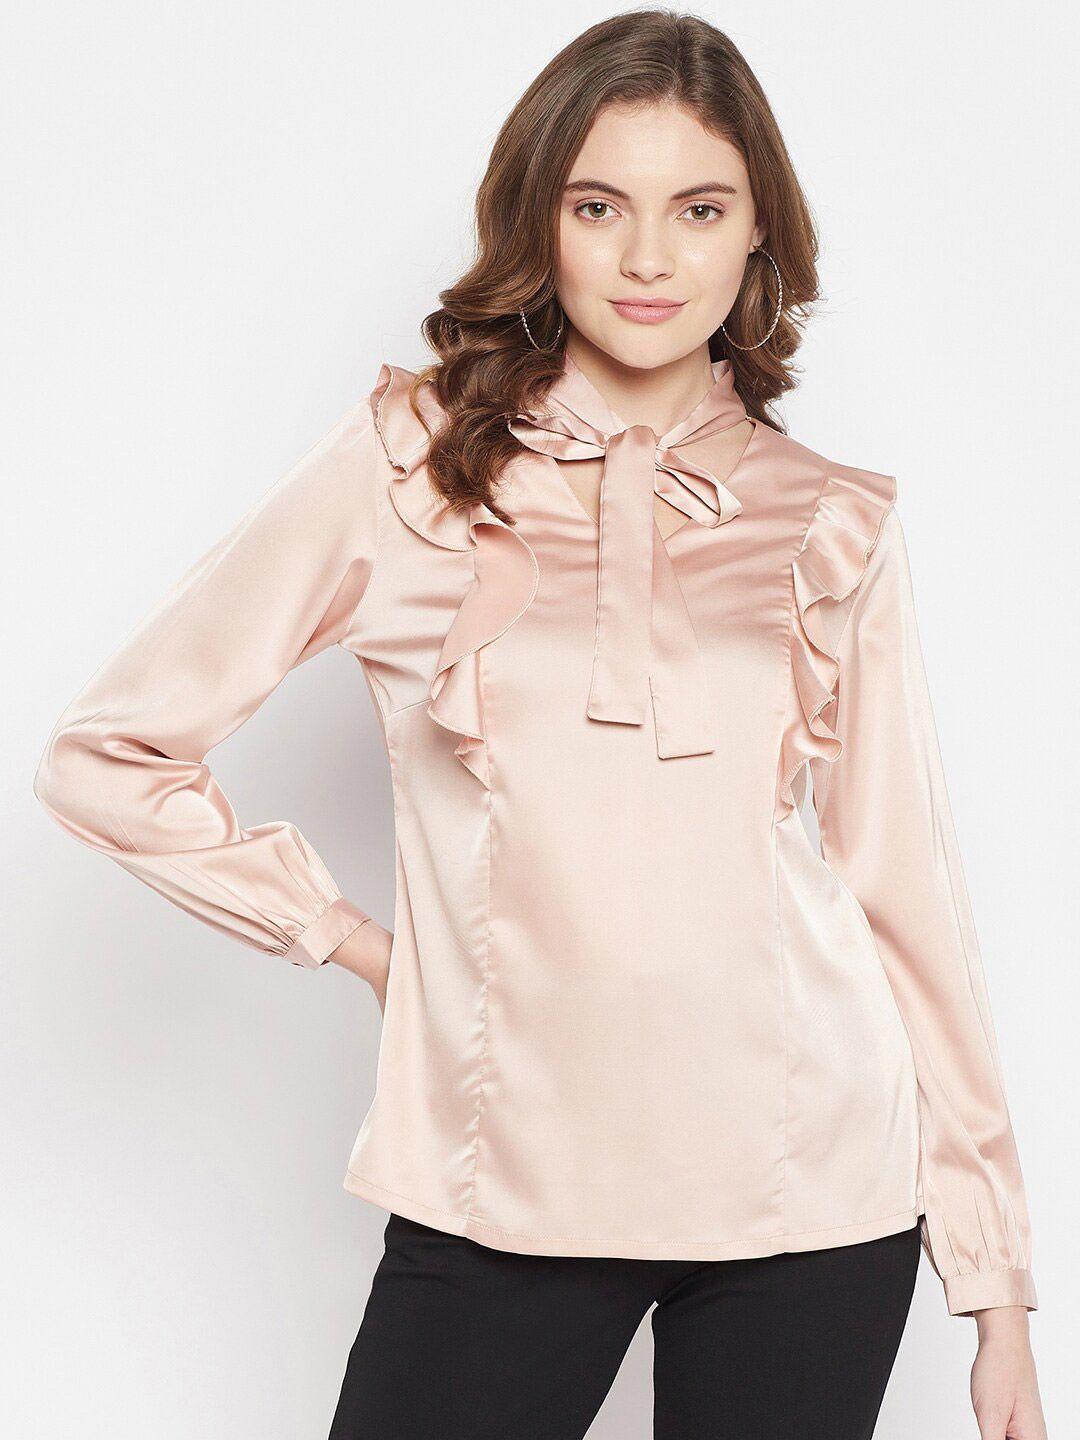 crozo by cantabil women pink tie-up neck cuffed sleeves satin top